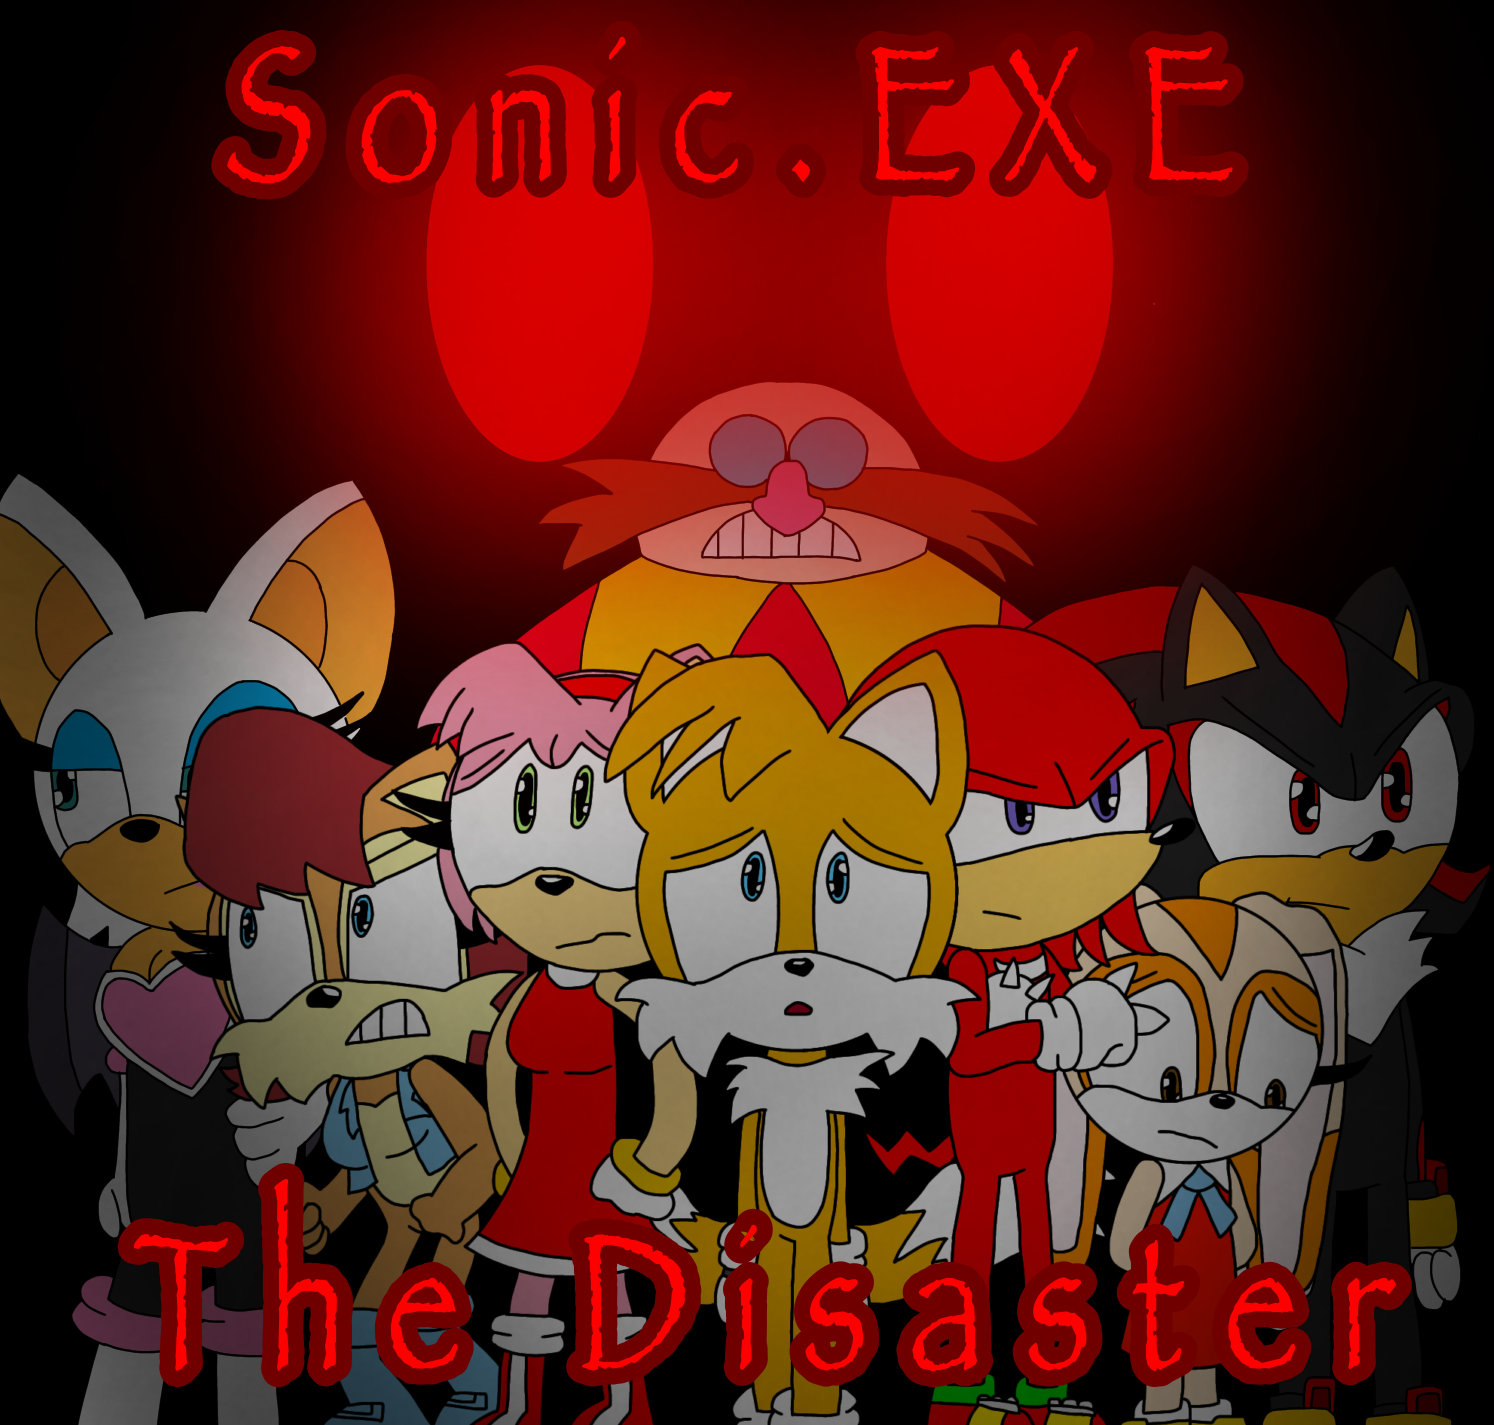 Sonic exe in Green hill Zone - Roblox